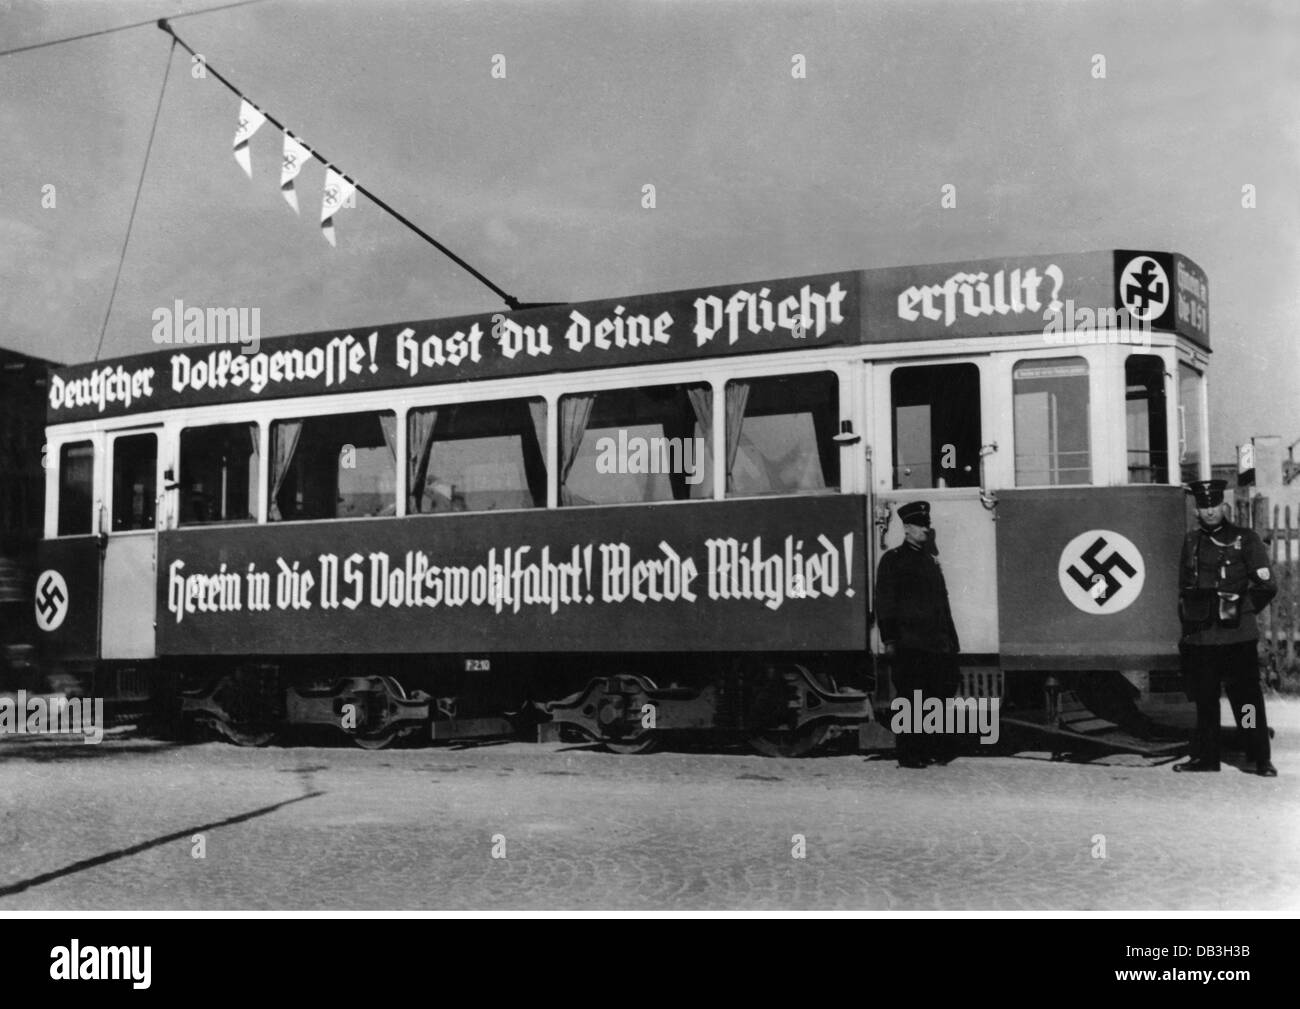 Nazism / National Socialism, propaganda, advertising for the NS-Volkswohlfahrt (National Socialist People's Welfare) on a streetcar, Berlin, 1930s, Additional-Rights-Clearences-Not Available Stock Photo